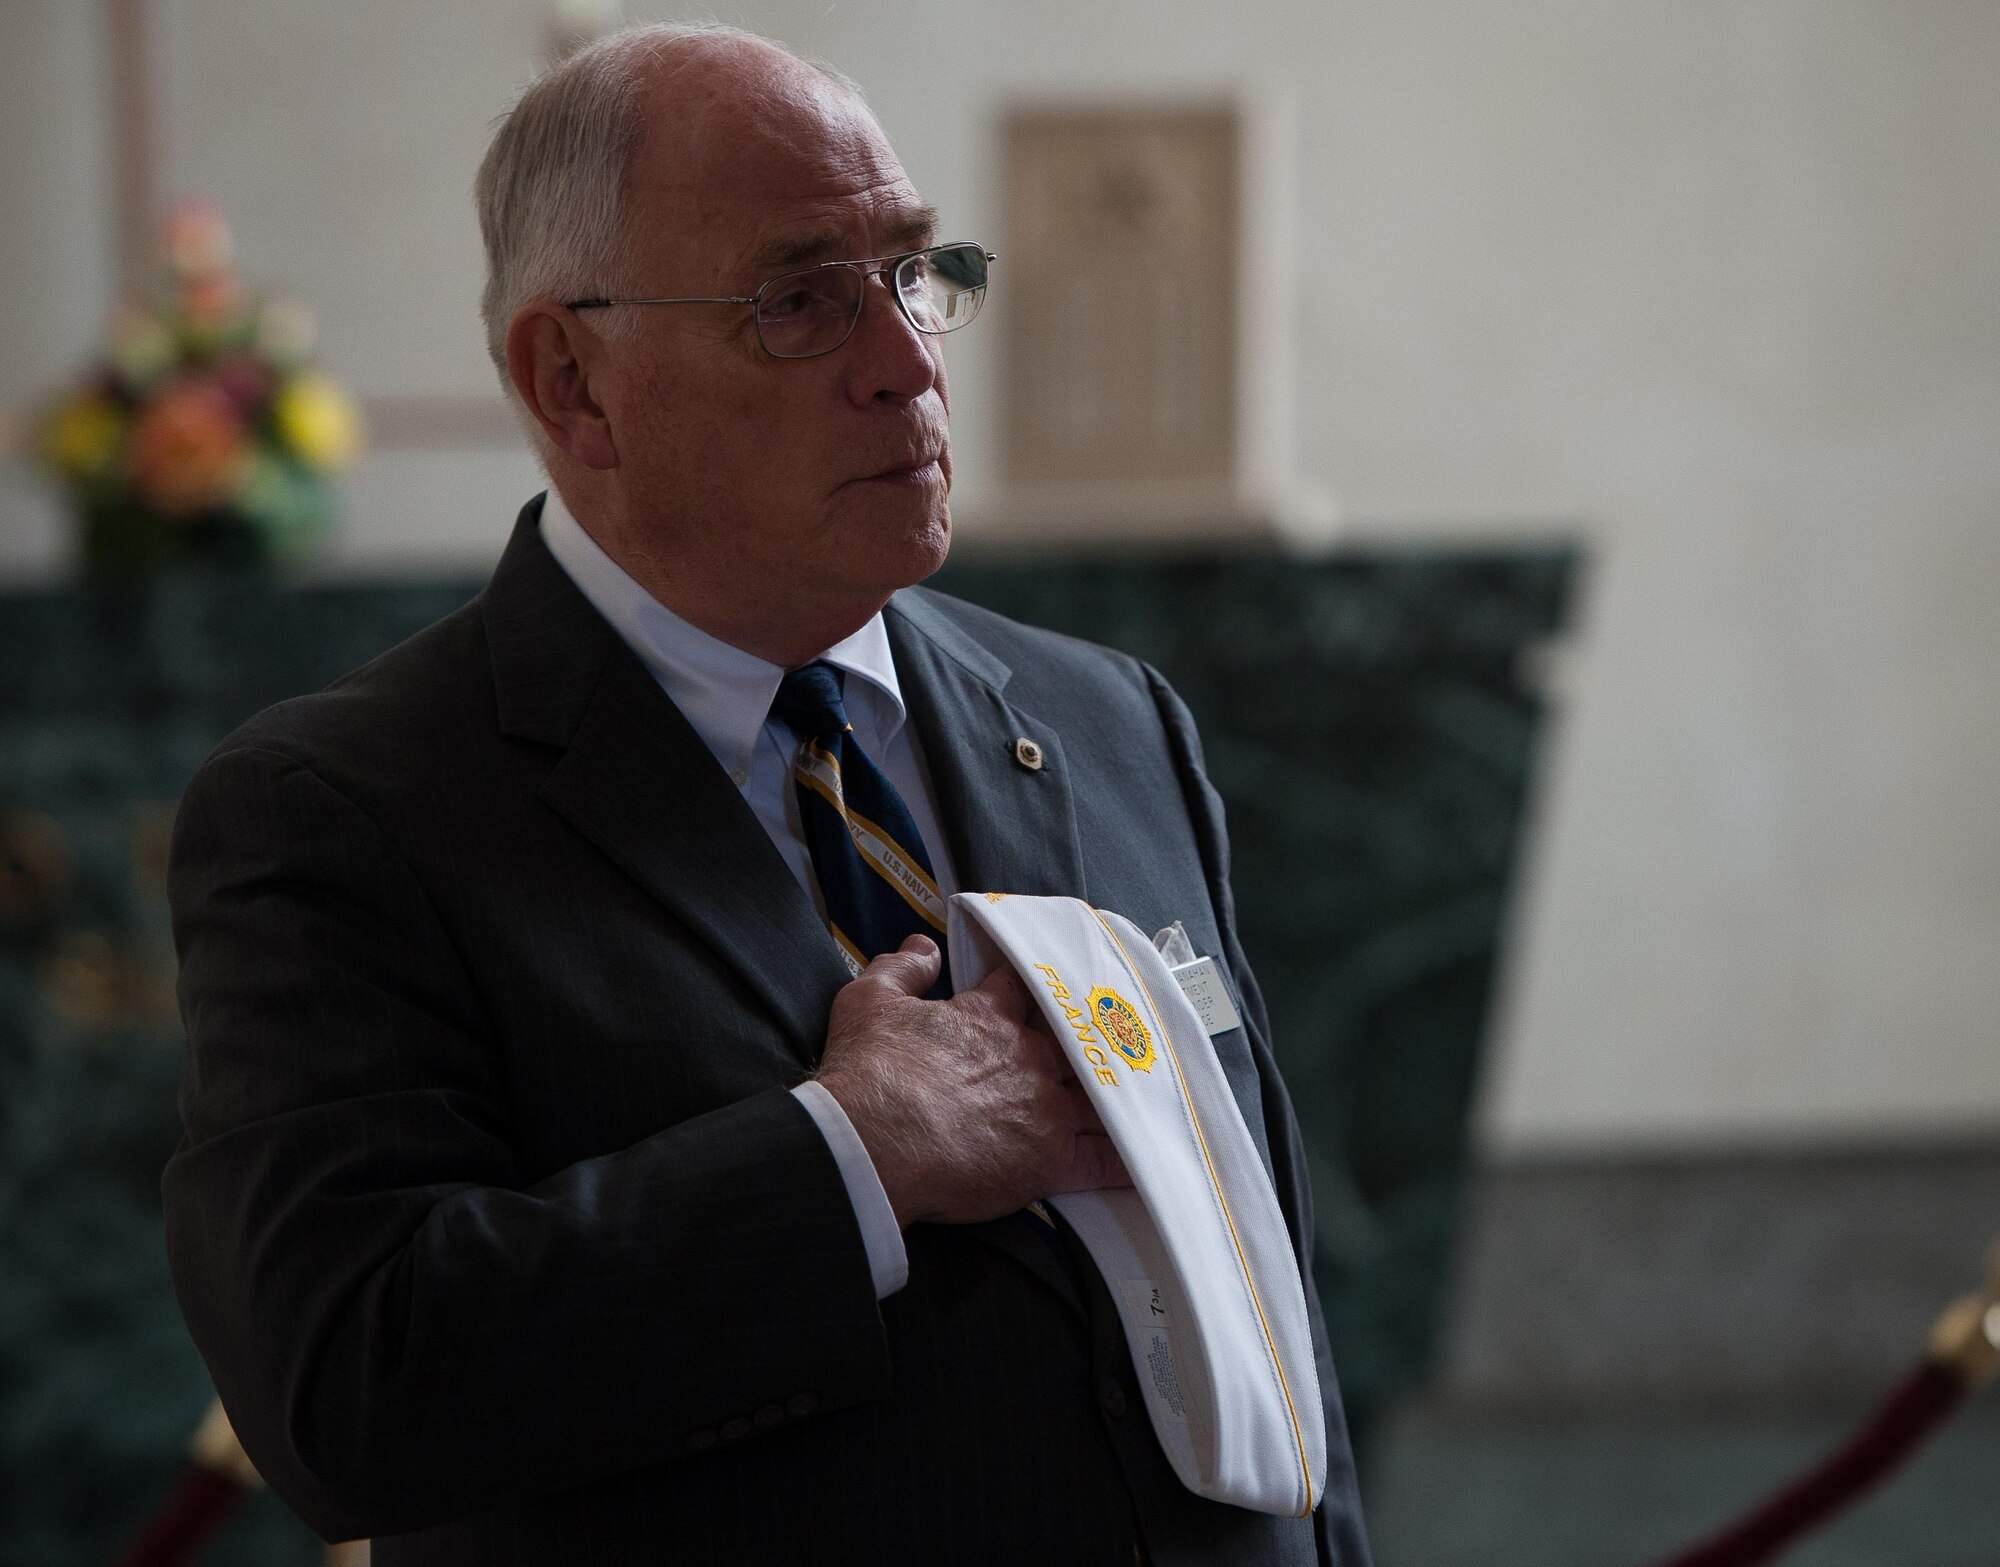 A retired veteran opens a wreath laying ceremony in prayer to honor and pay his respects to the deceased war veterans at Lorraine American Cemetery Nov. 11, 2016, at St. Avold, France. Veteran’s Day is observed annually on November 11 and commemorates military veterans who currently serve or have served the U.S. armed forces, including those who gave the ultimate sacrifice. According to the DoD and Veterans Administration, since World War I, approximately 624,000 U.S. servicemembers have been killed in action battling in wars and conflicts. The Lorraine American Cemetery contains the buried remains of over 10,000 of them. It is the largest burial site of U.S. servicemembers in Europe. (U.S. Air Force photo by Airman 1st Class Lane T. Plummer)